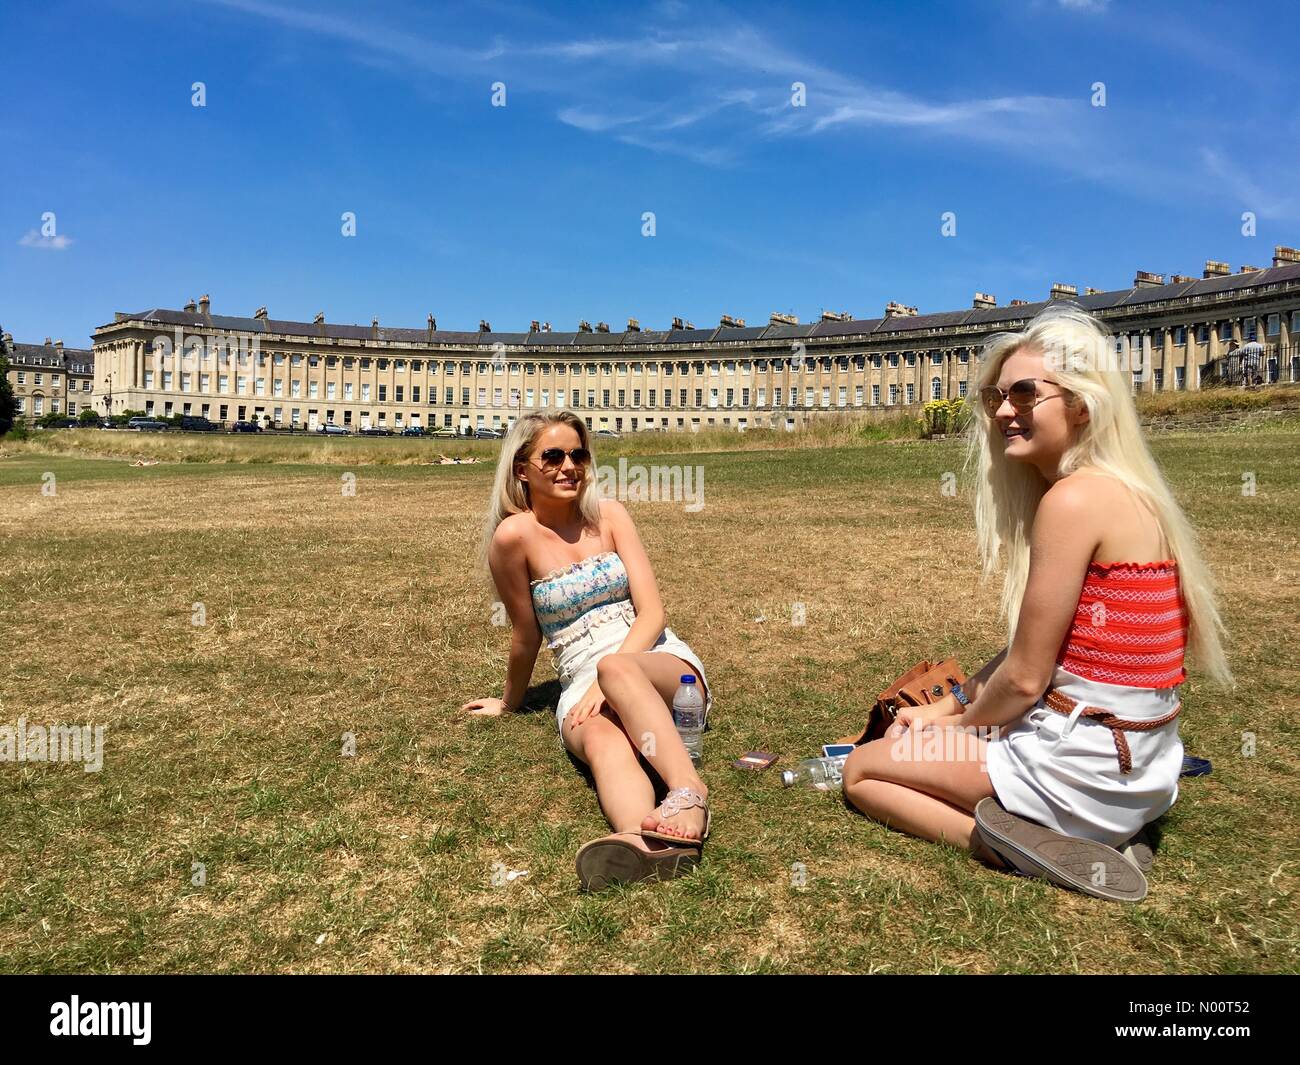 UK Weather - Bath, England 7th July 2018 Two young women visiting from Brittany enjoying a sunny warm day in front of the Royal Crescent in Bath, where temperatures are predicted to reach 29 degrees. Stock Photo